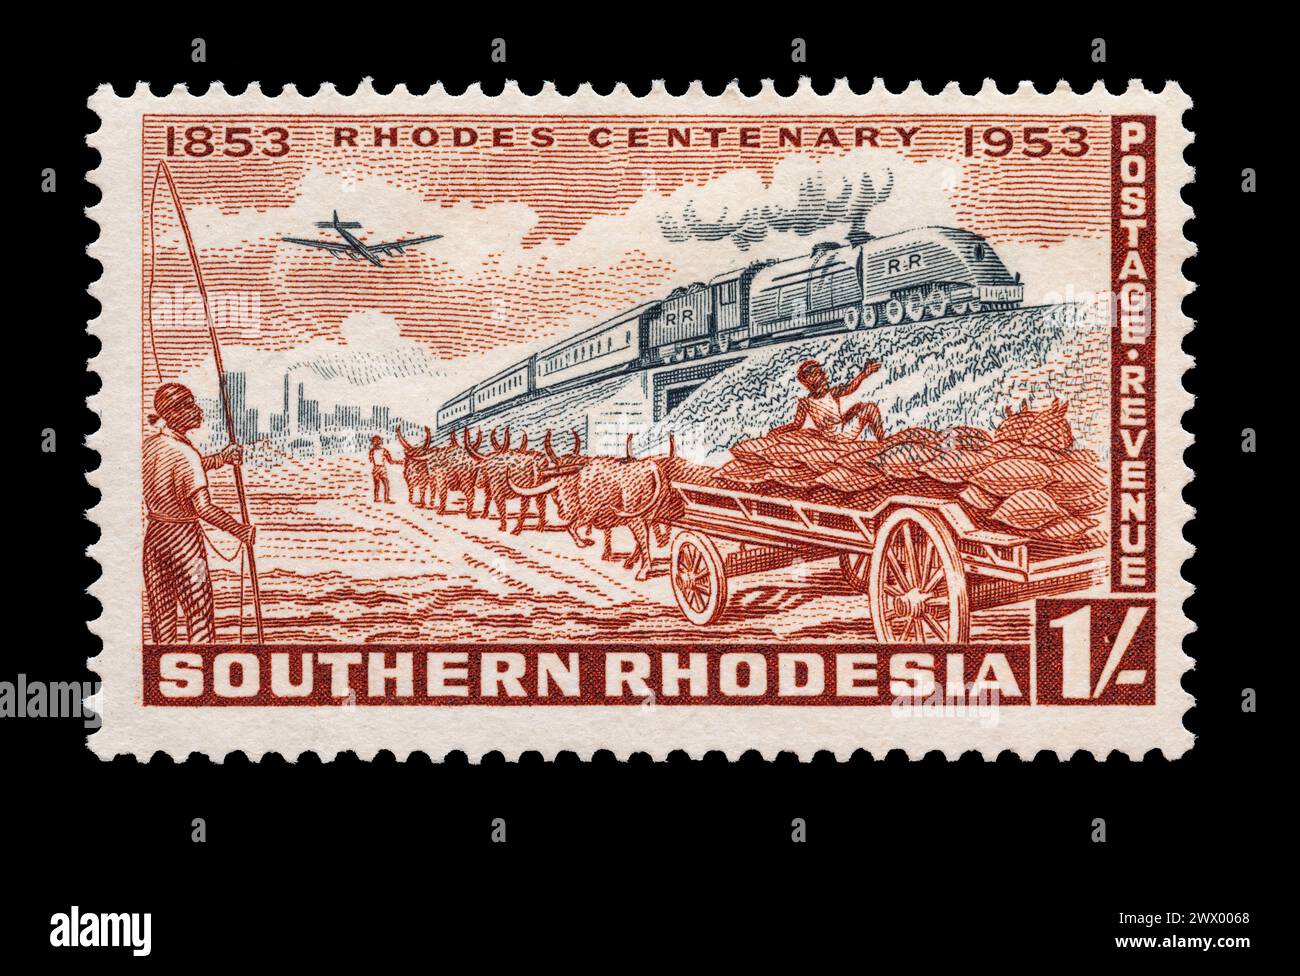 Vintage postage stamp from Southern Rhodesia circa 1953. Celebrating Rhodes Birth Centenary. Artwork showing aeroplanes, trains and farm cart. Stock Photo